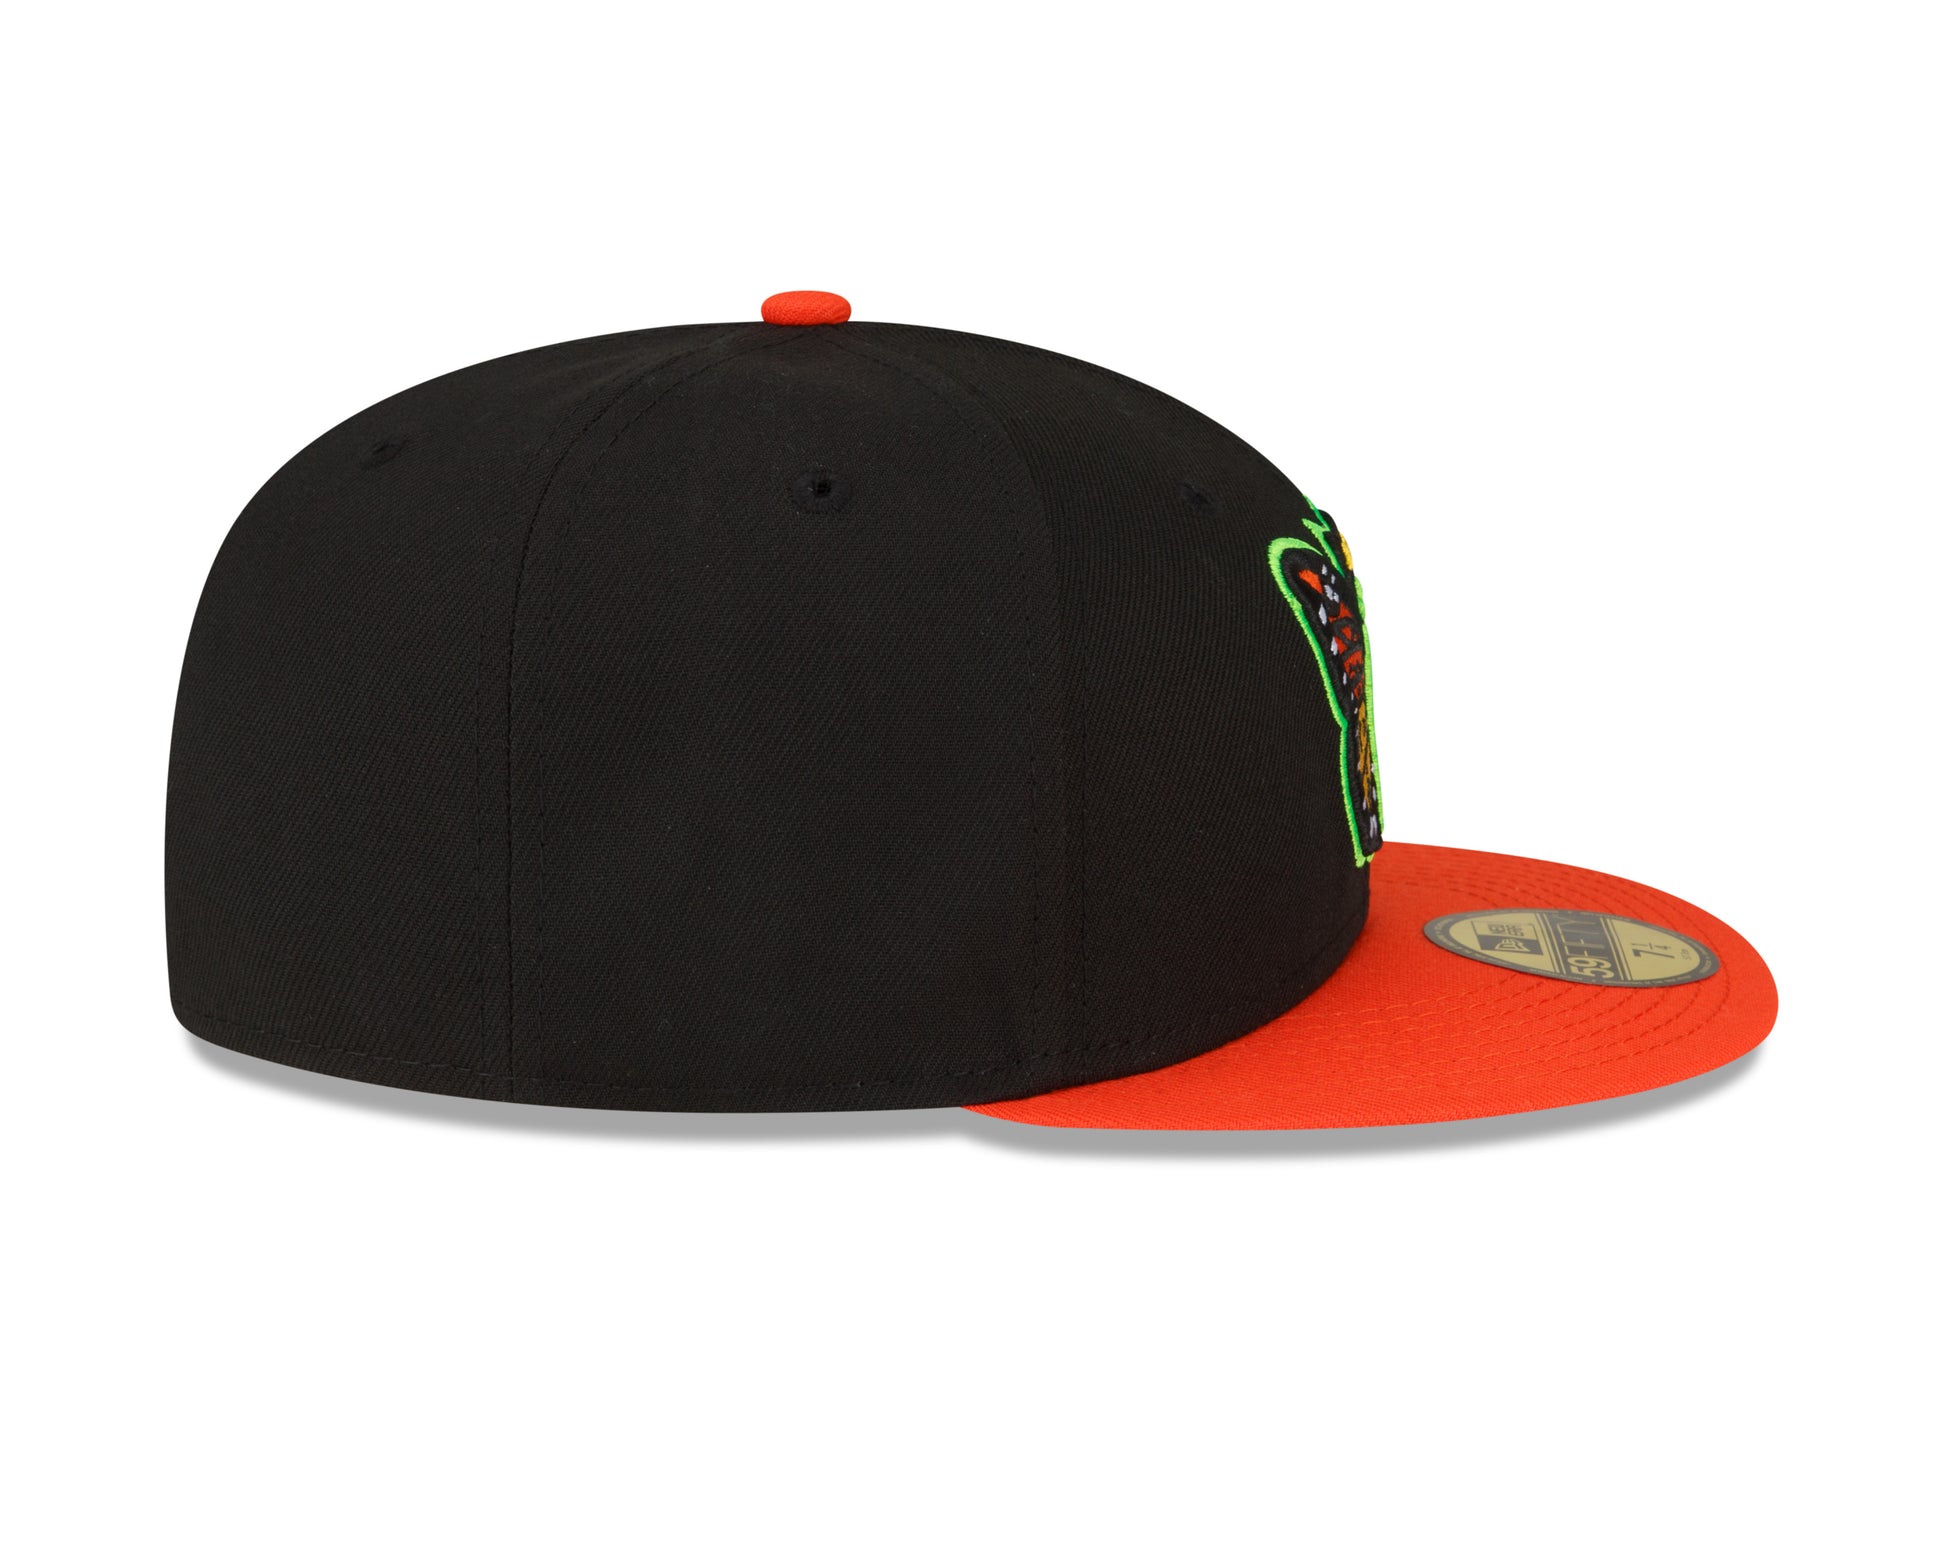 New Era - 59fifty Fitted - MiLB - COPA - Eugene Emeralds - Black/Red - Headz Up 